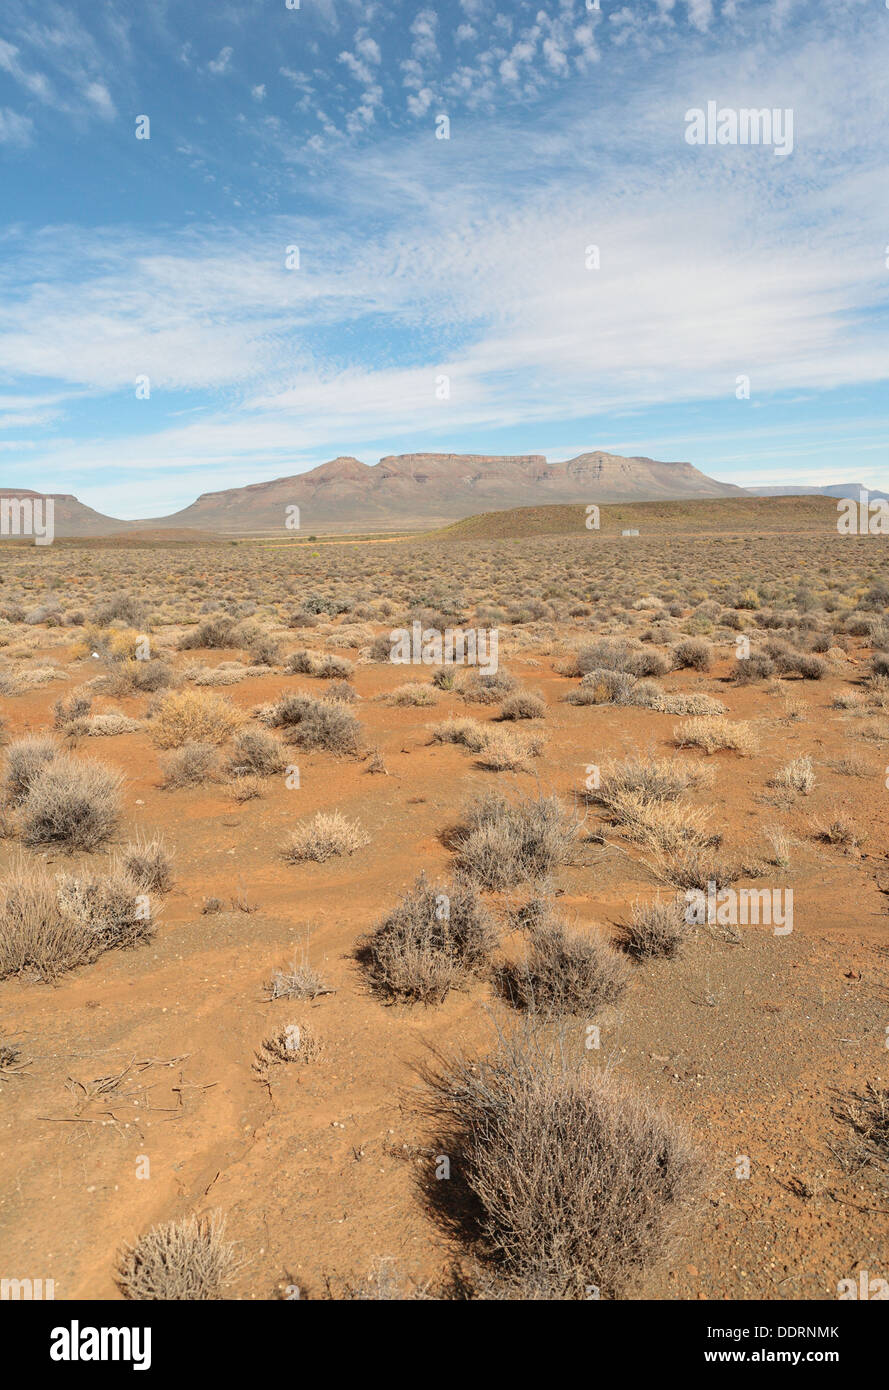 Sparse vegetation with mountains in the background in the Karroo region, Northern Cape Province, South Africa Stock Photo